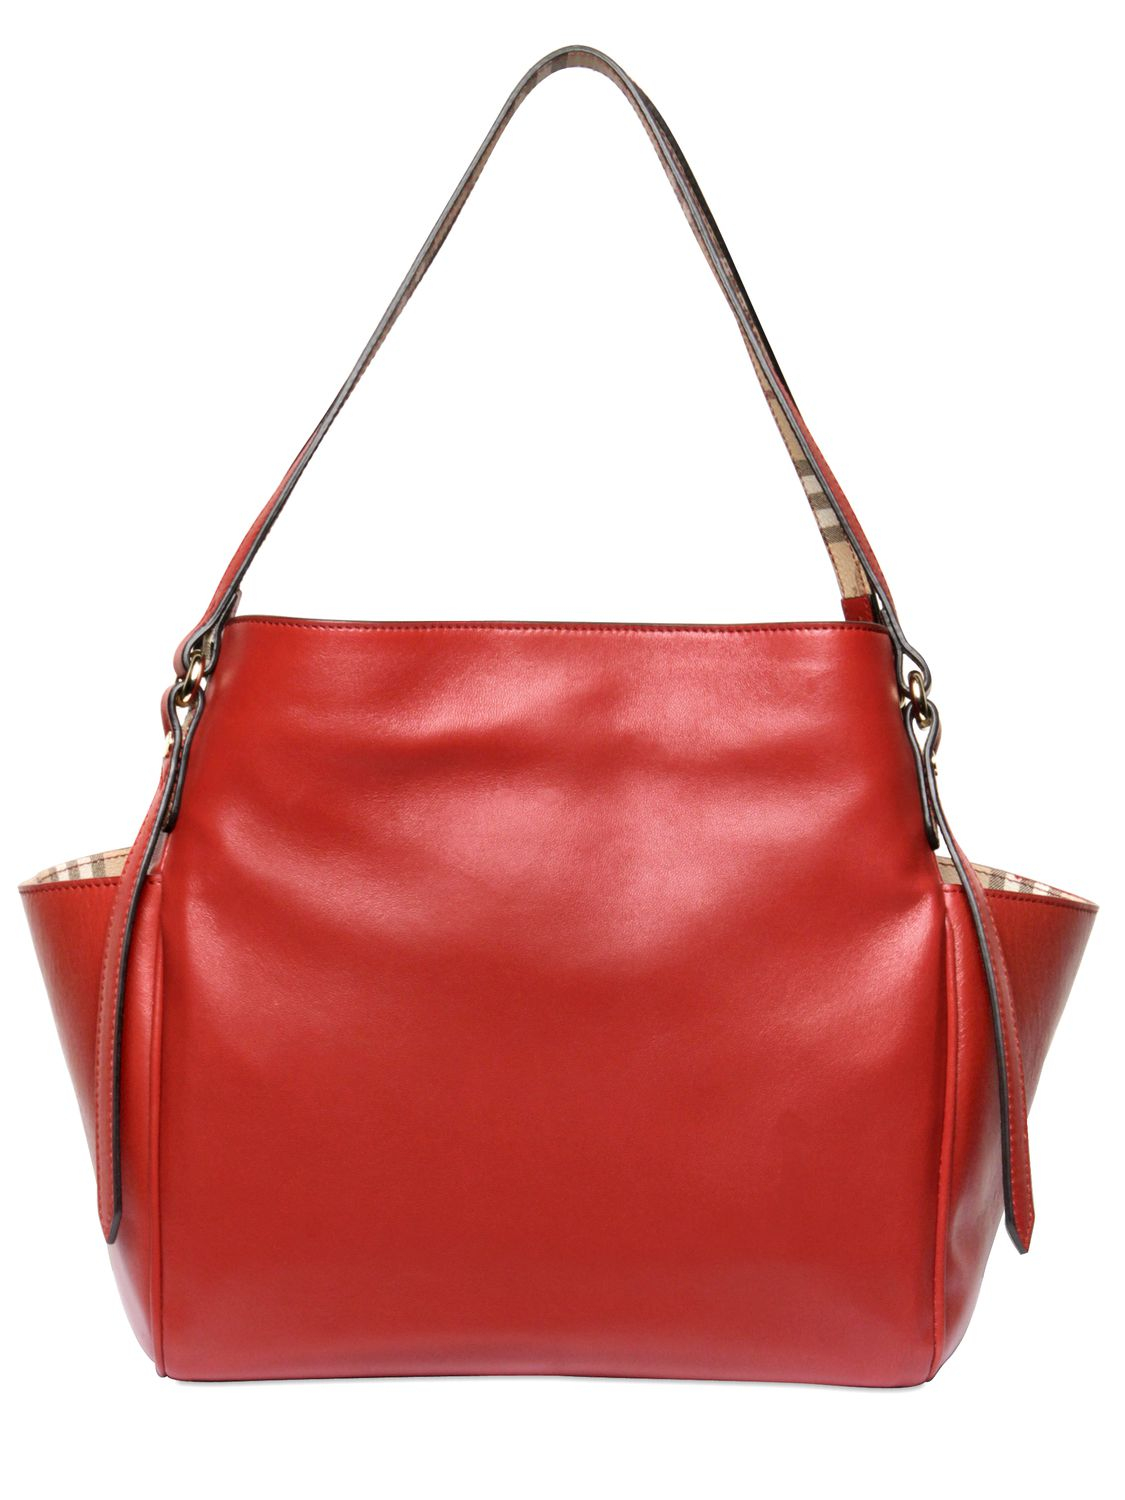 Burberry Small Canterbury Soft Leather Bag in Red - Lyst